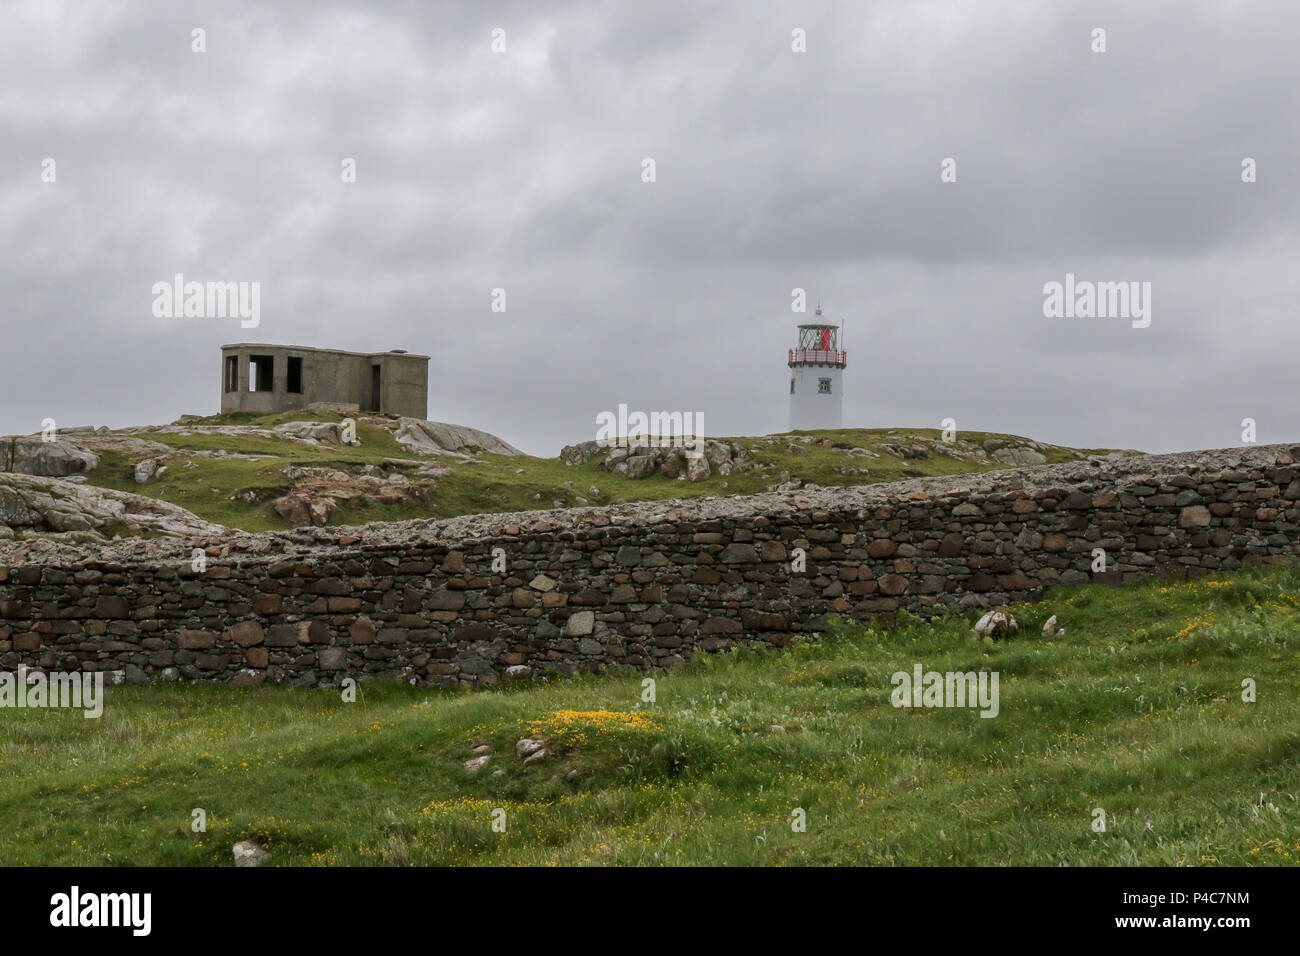 Fanad Head, a rocky headland in County Donegal Ireland, with a derelict coastal lookout building and Fanad lighthouse behind the stone perimeter wall. Stock Photo